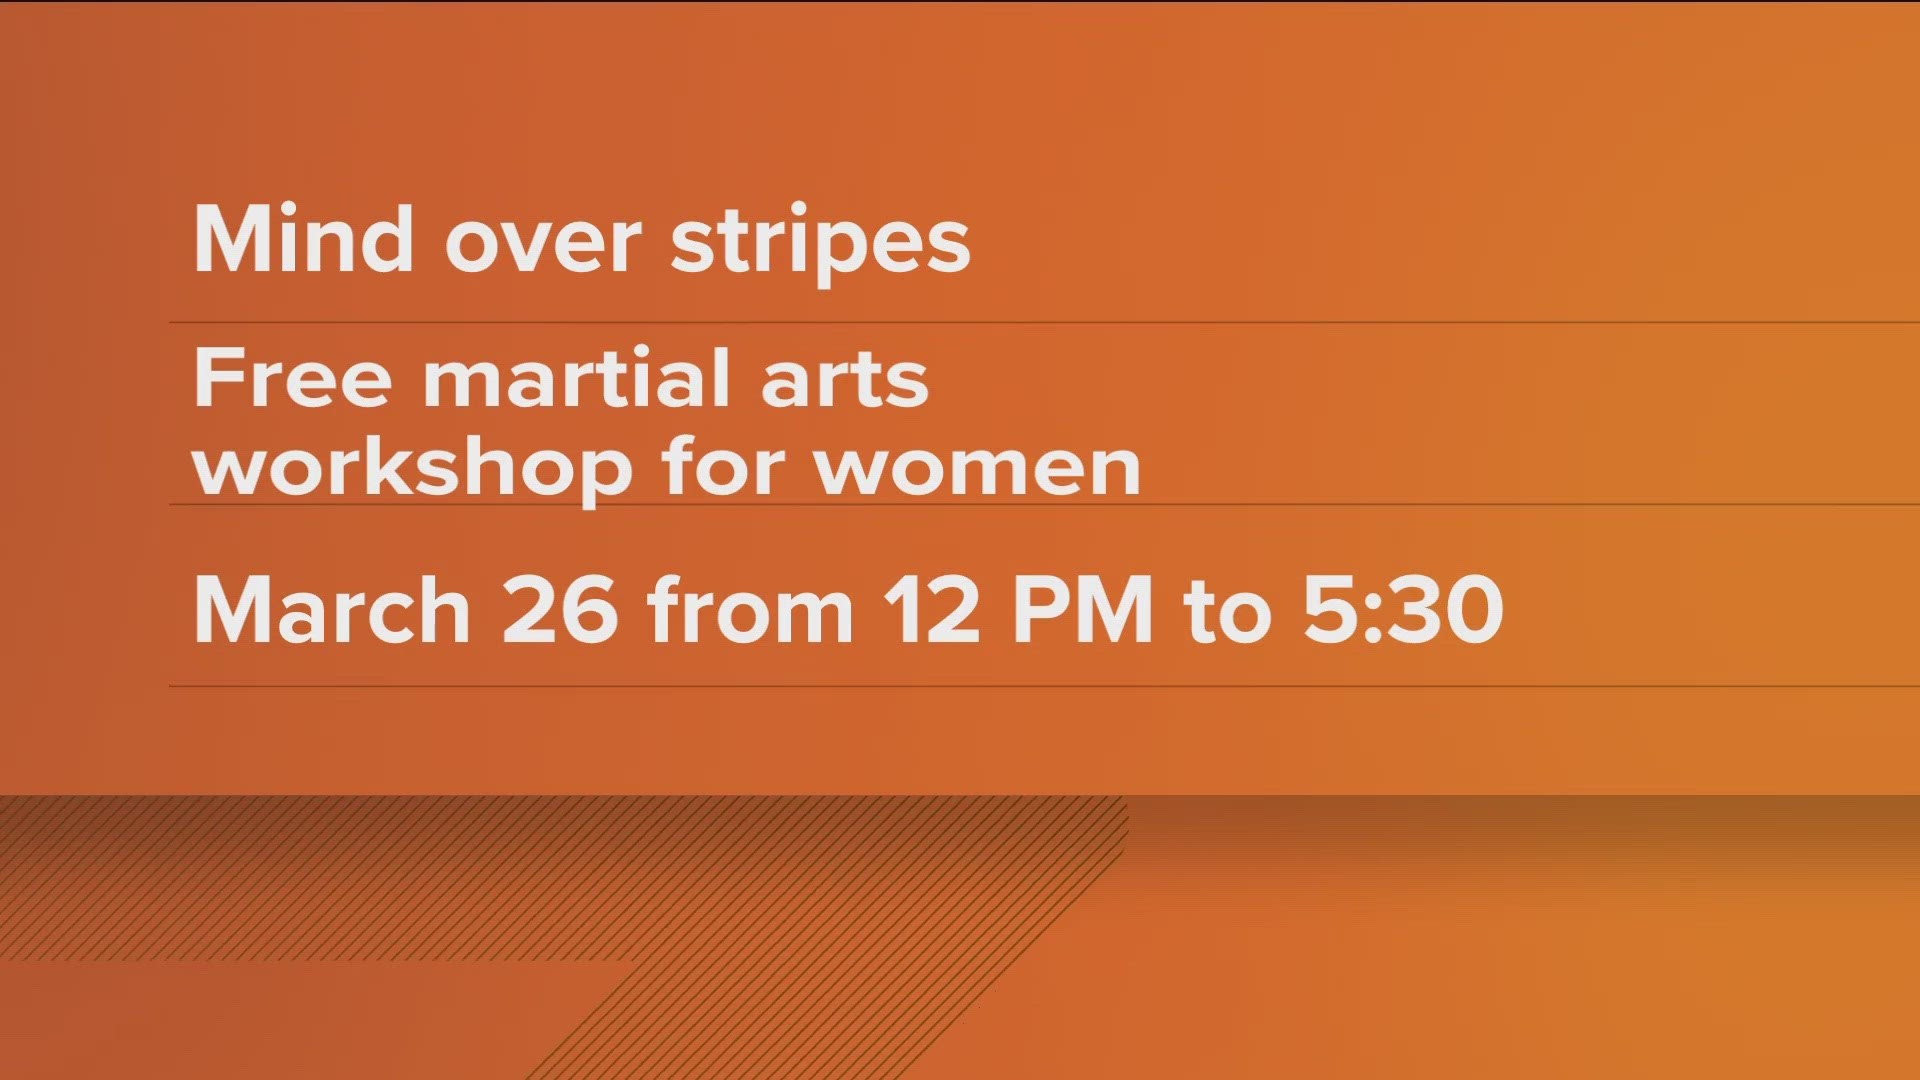 Mind Over Stripes will host a free self-defense training for women in Toledo Sunday.